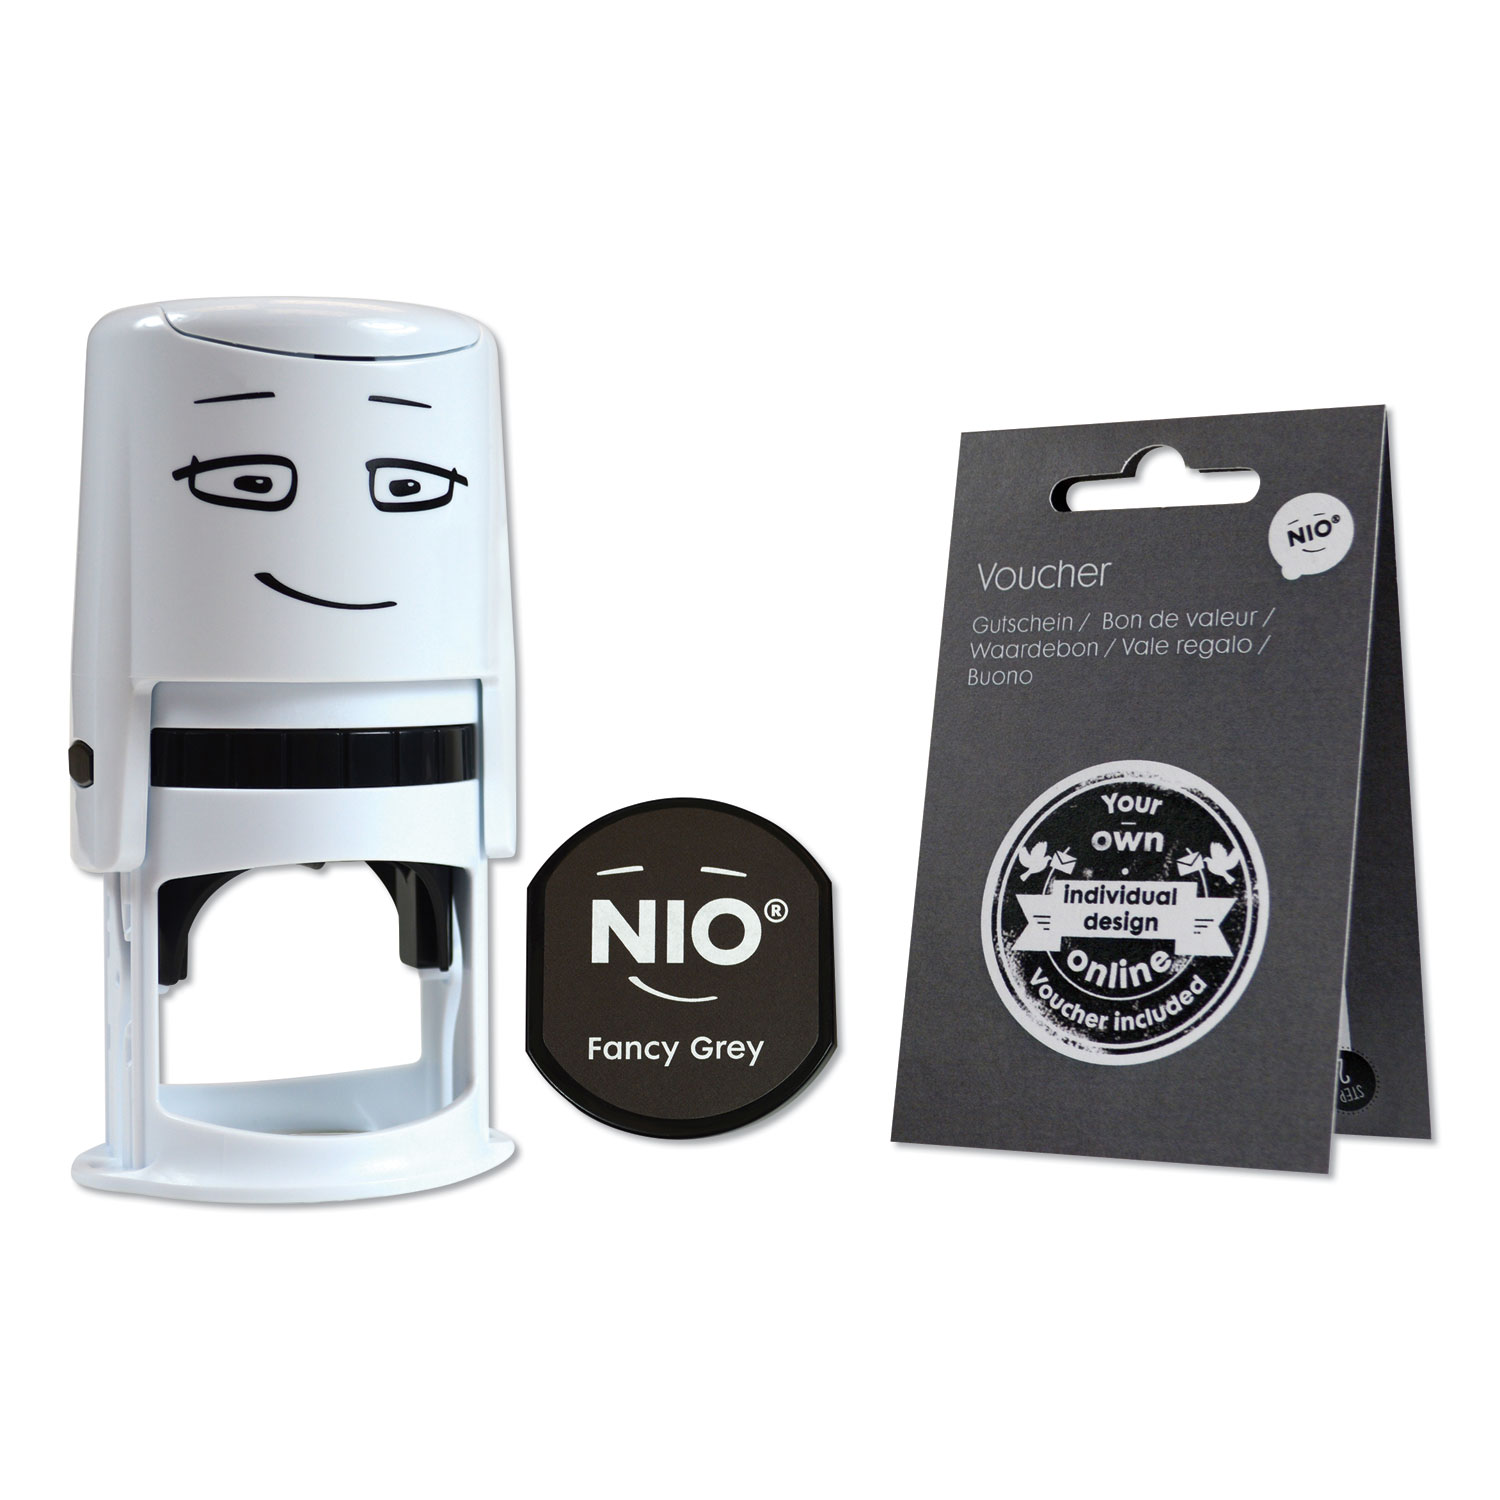  NIO 071509 Stamp with Voucher and Fancy Gray Ink Pad, Self-Inking, 1.56 Diameter (COS071509) 